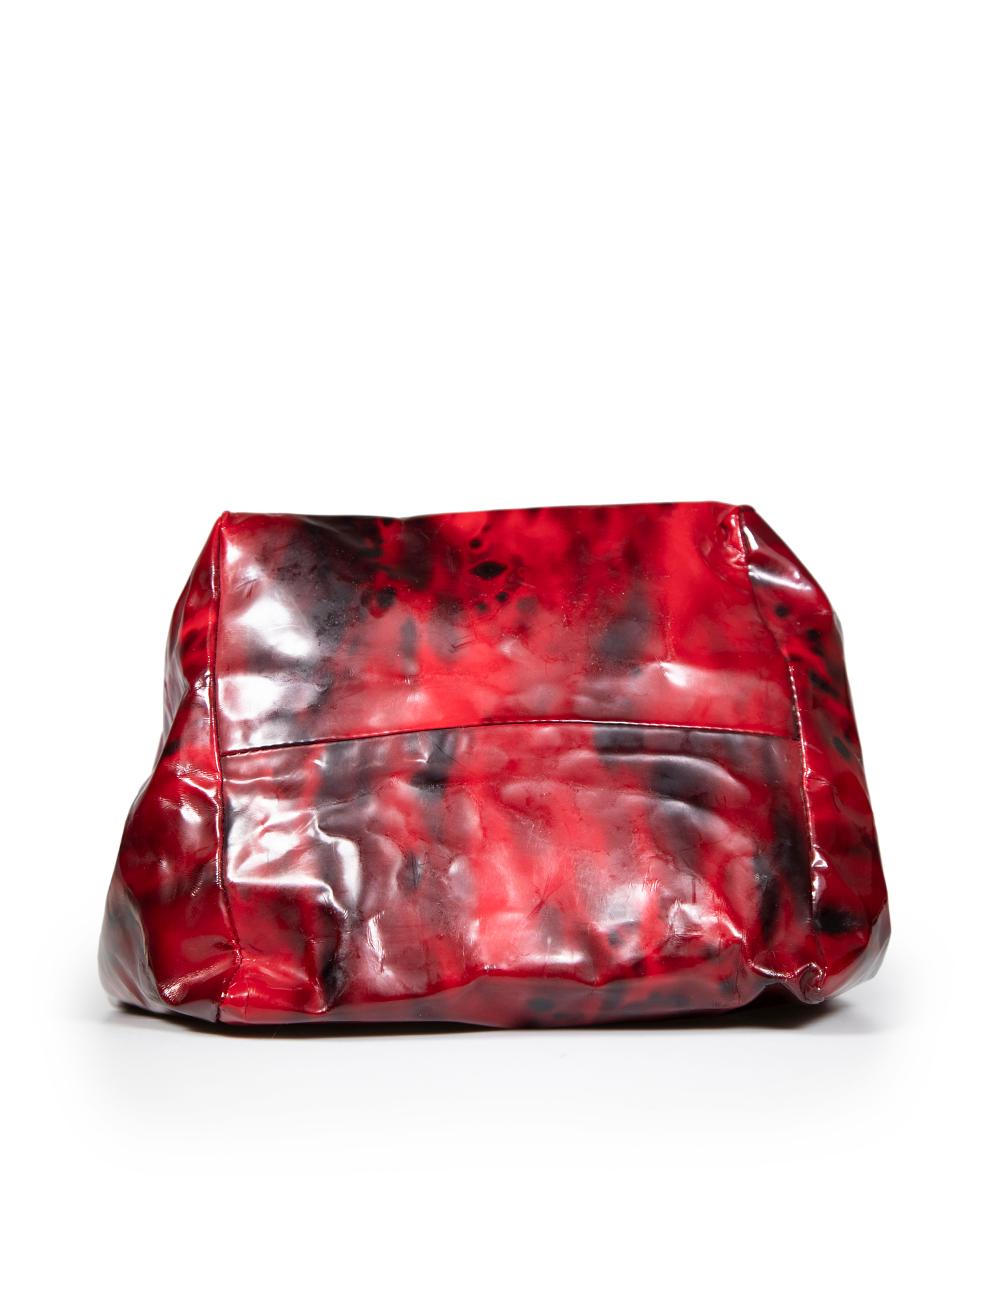 Women's Jimmy Choo Red Patent Leather Printed Lola Bag For Sale